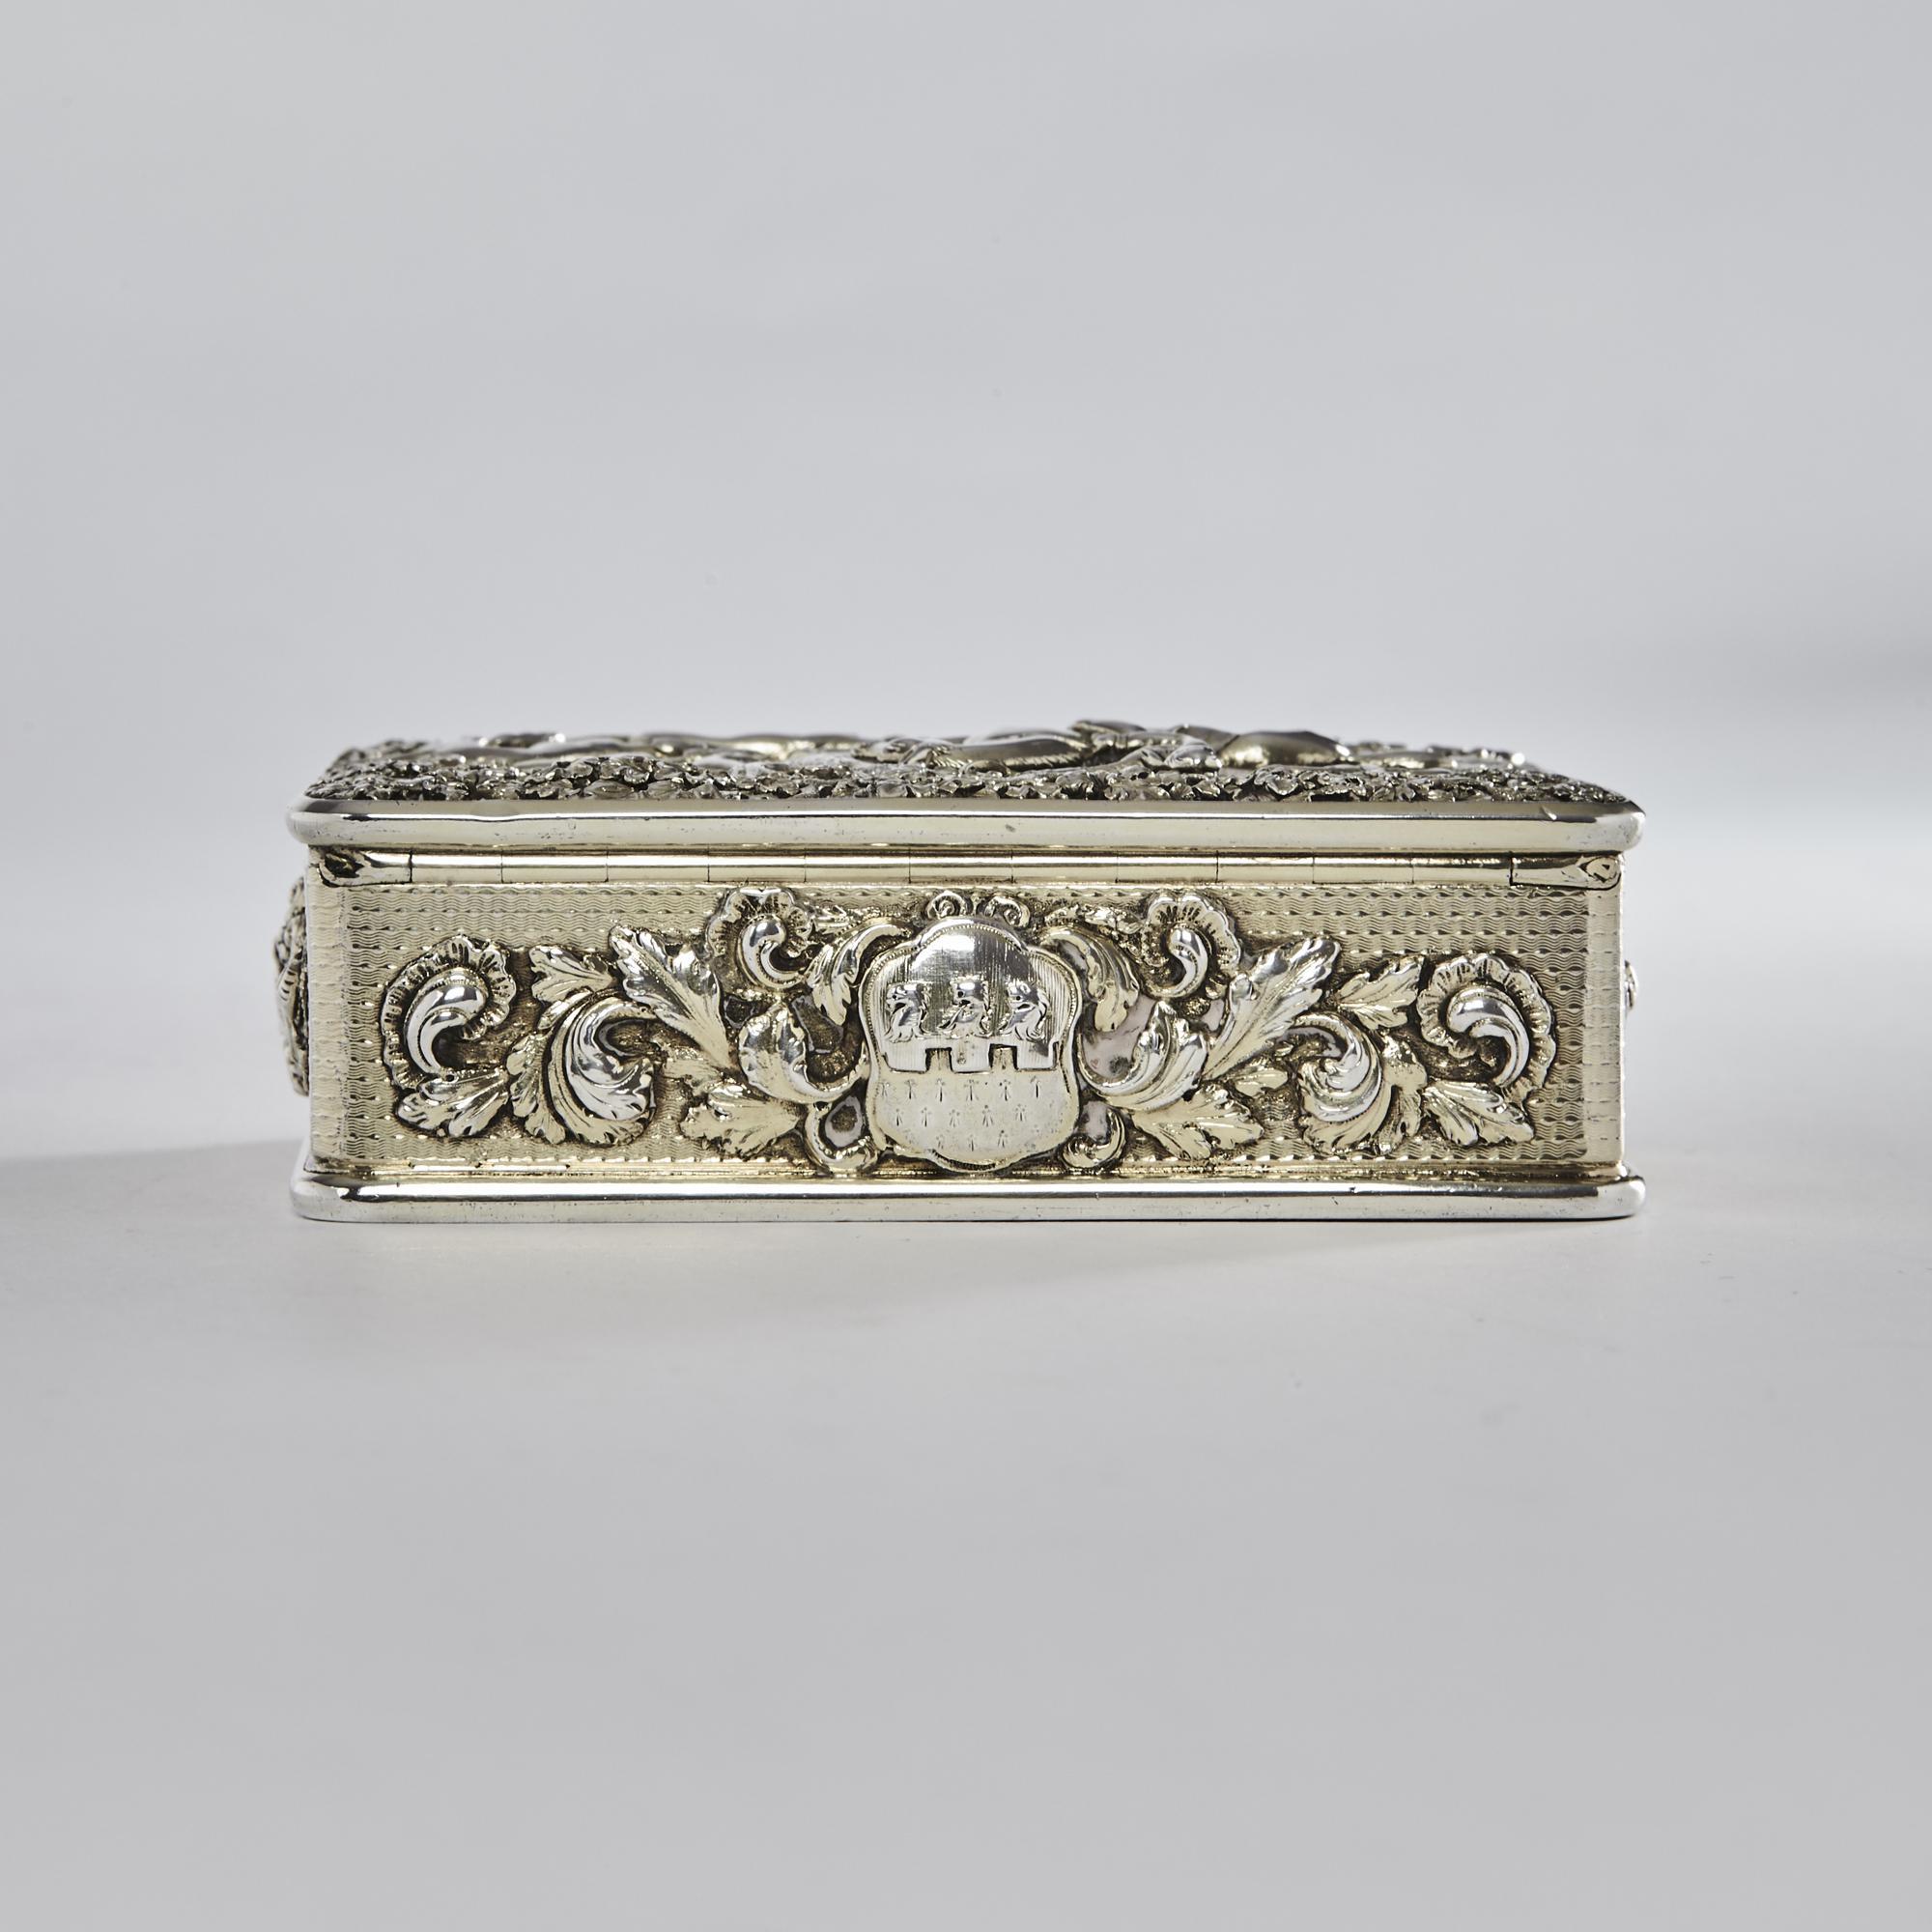 Fine Georgian snuff box with cast scene on the lid of huntsmen and hounds chasing a fox through the woods. The sides of the box have cast and applied foliate cartouches incorporating crests and arms for Williams of Dorset. This exceptionally heavy